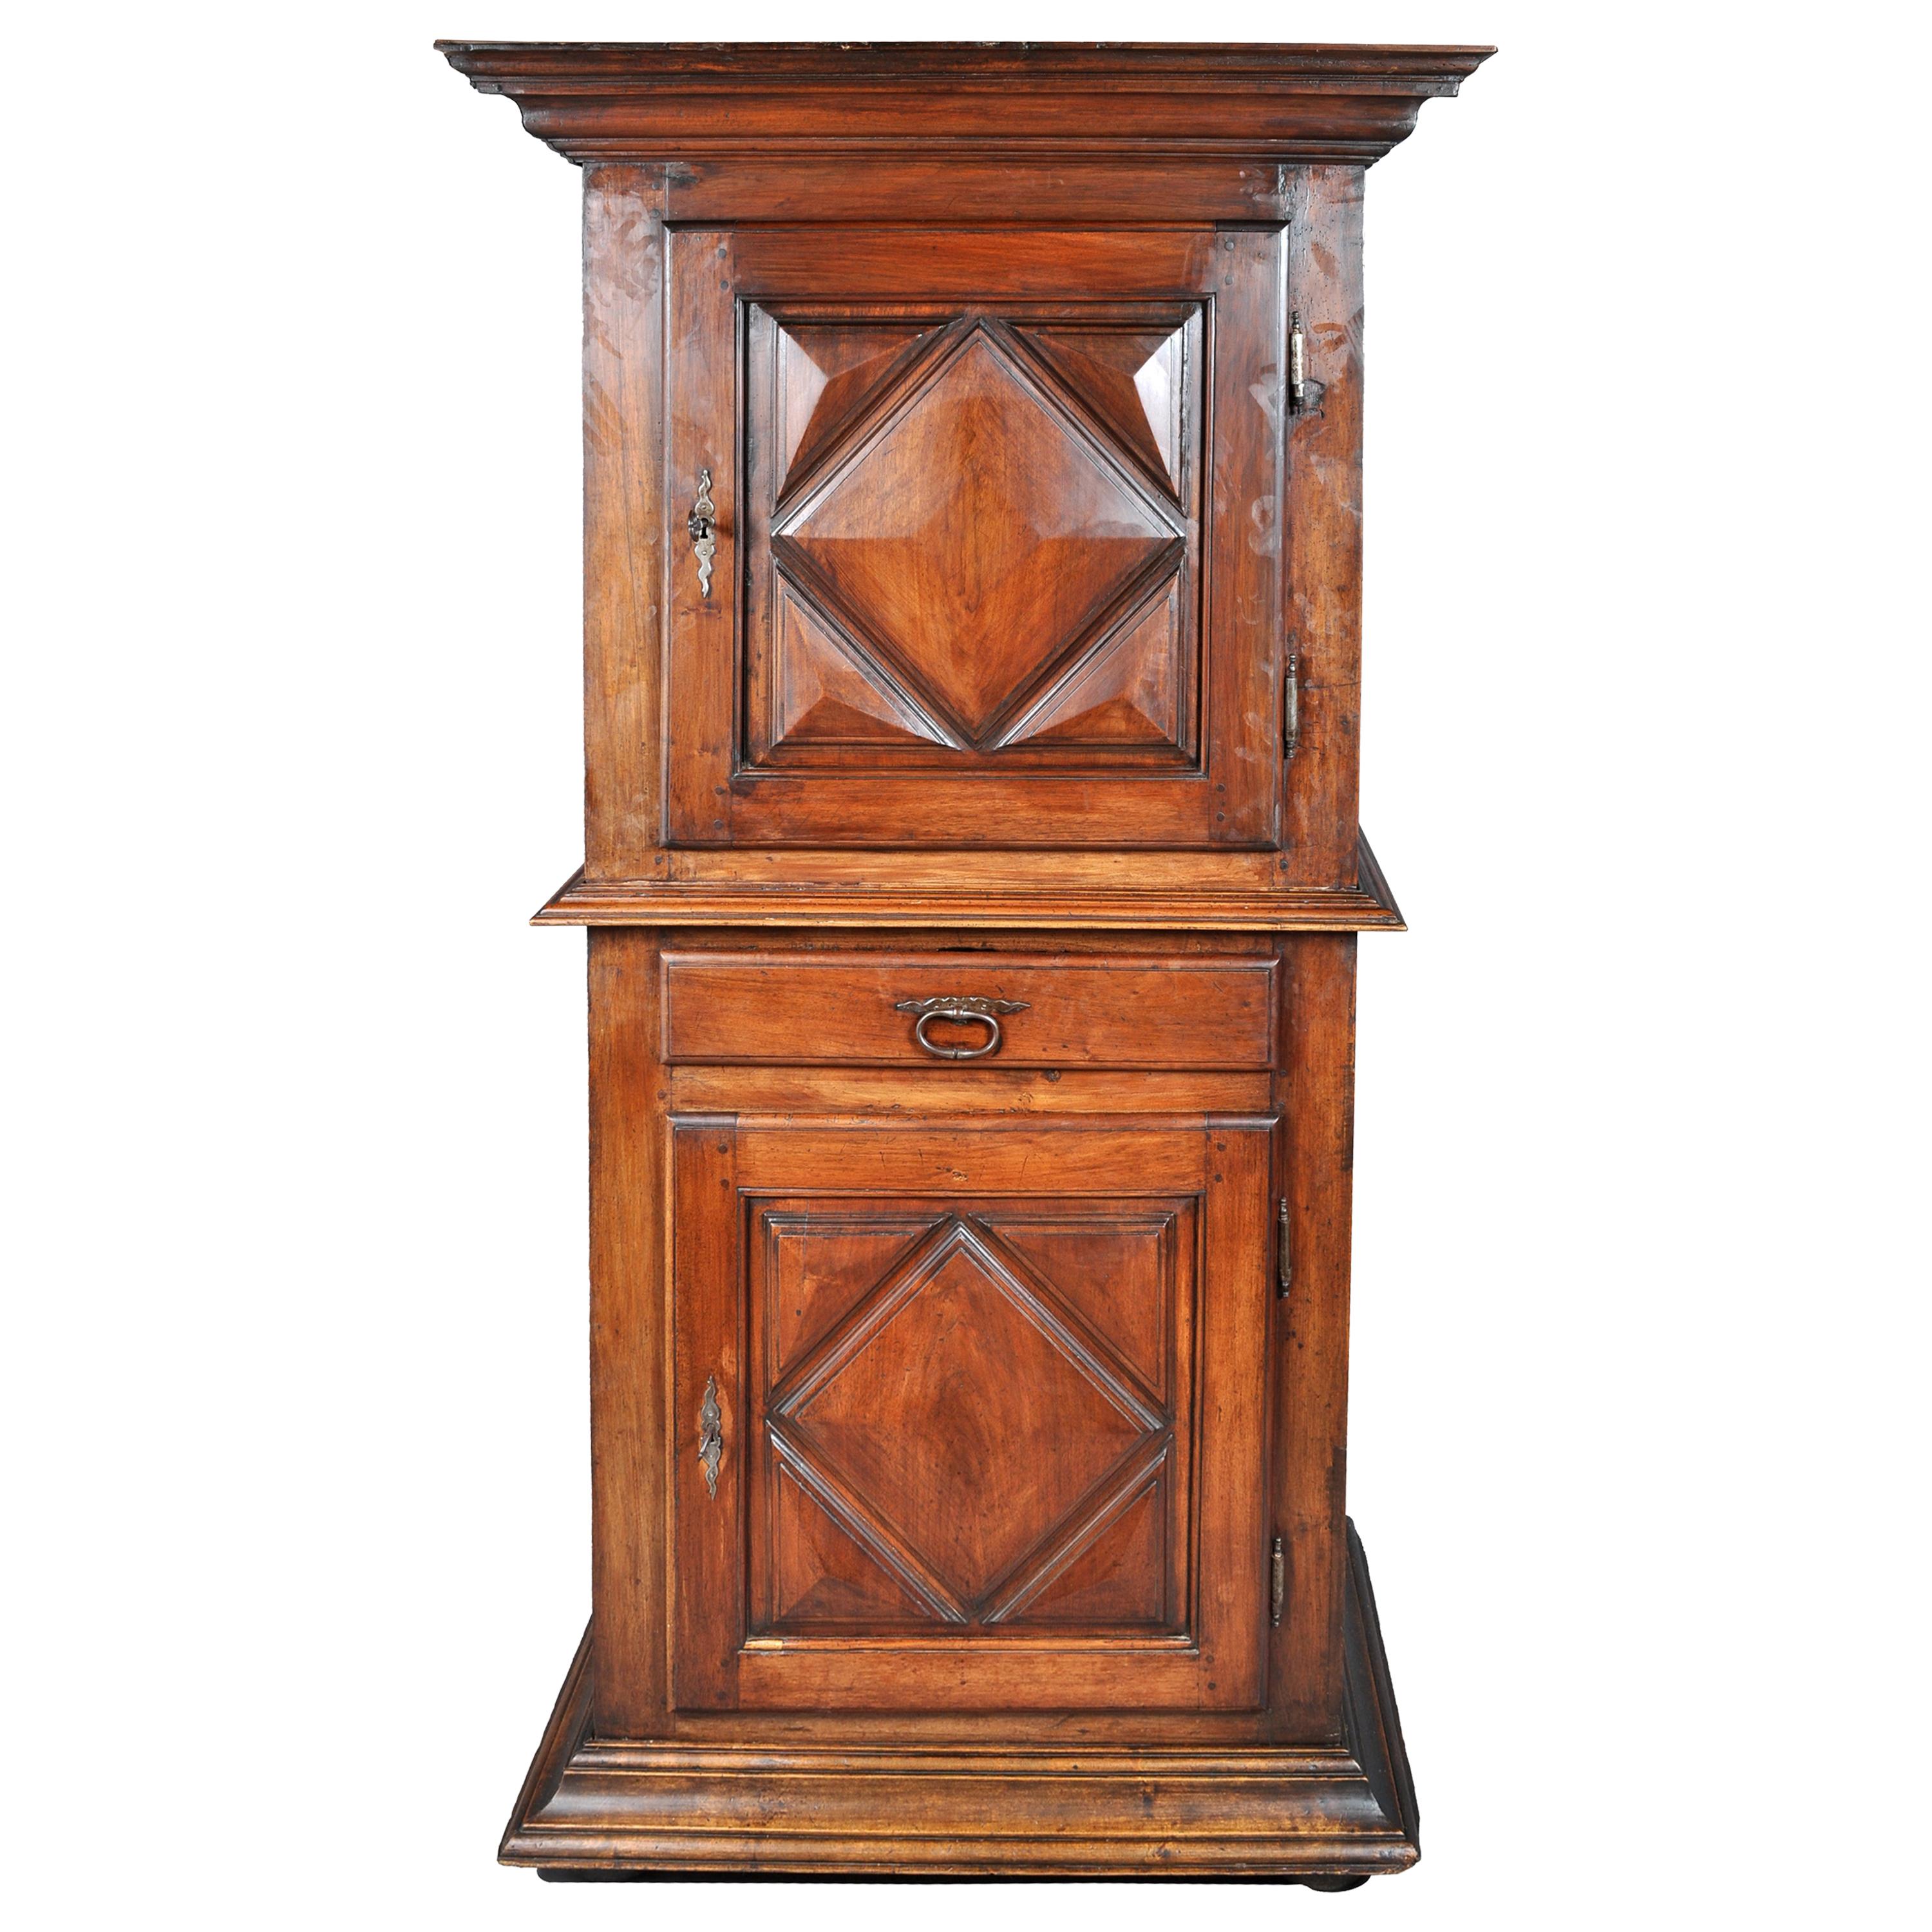 Antique French Louis XIII Walnut Cabinet / Armoire / Bonnetiere, circa 1750